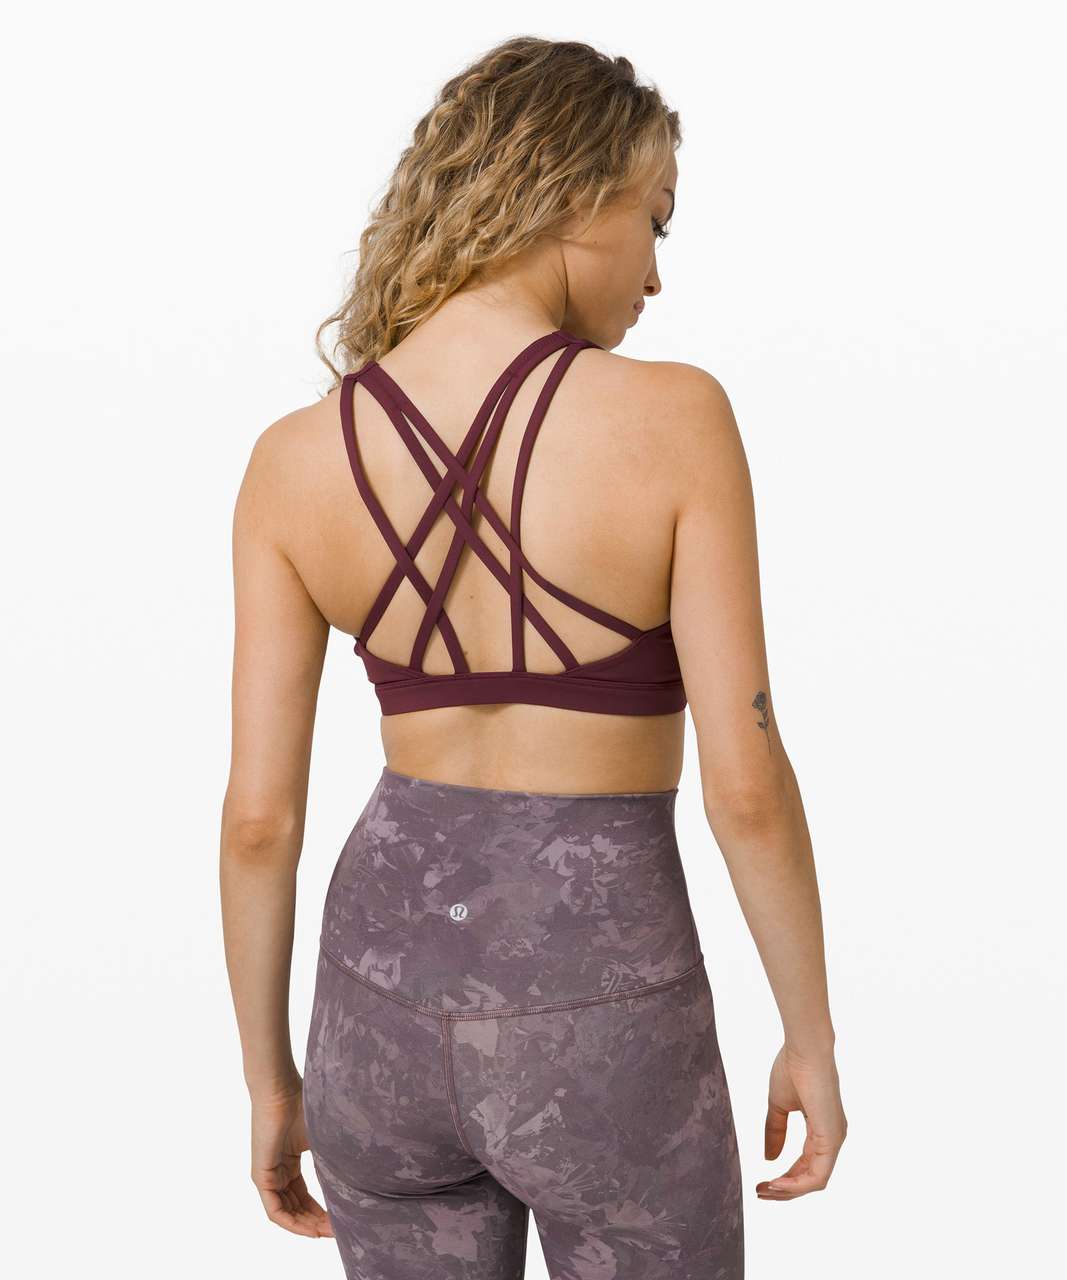 Lululemon Free to Be Serene Bra *Light Support, C/D Cup - Cassis